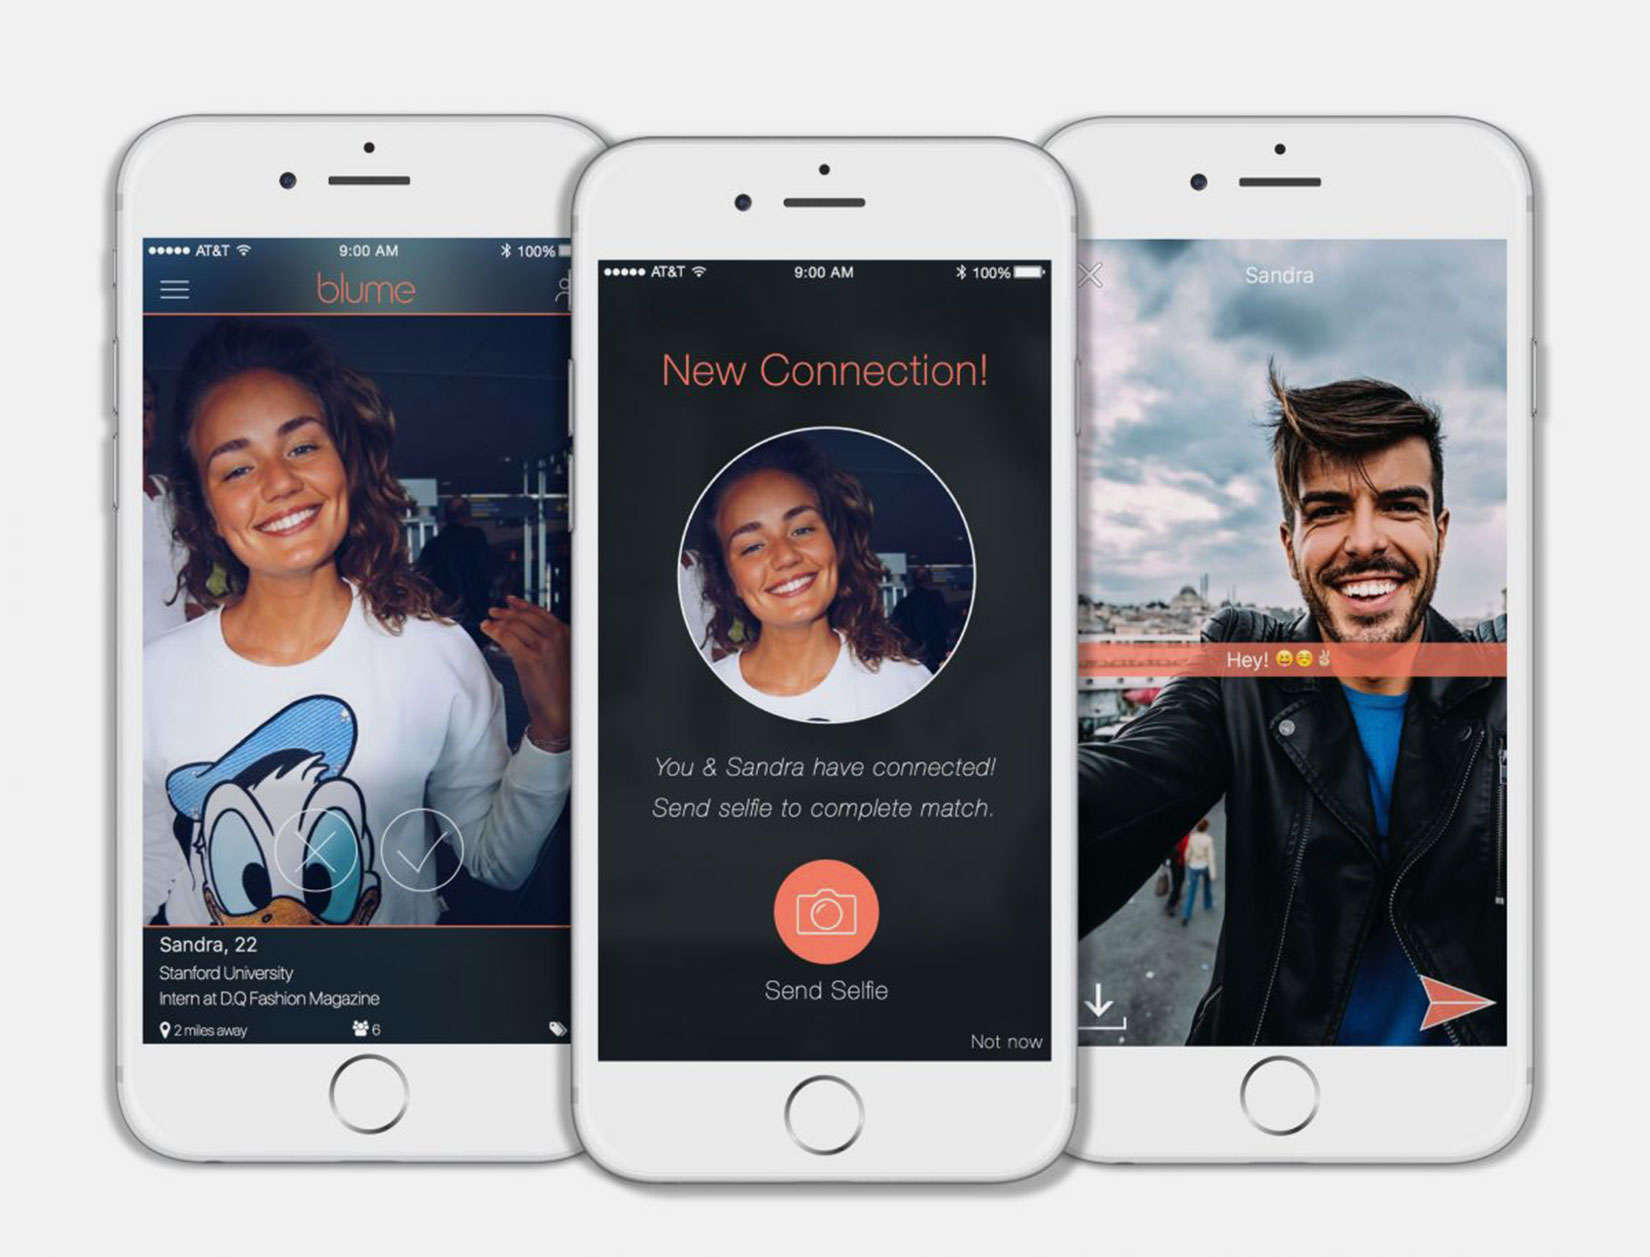 Real-time selfies are required for meeting a match on the dating app Blume.